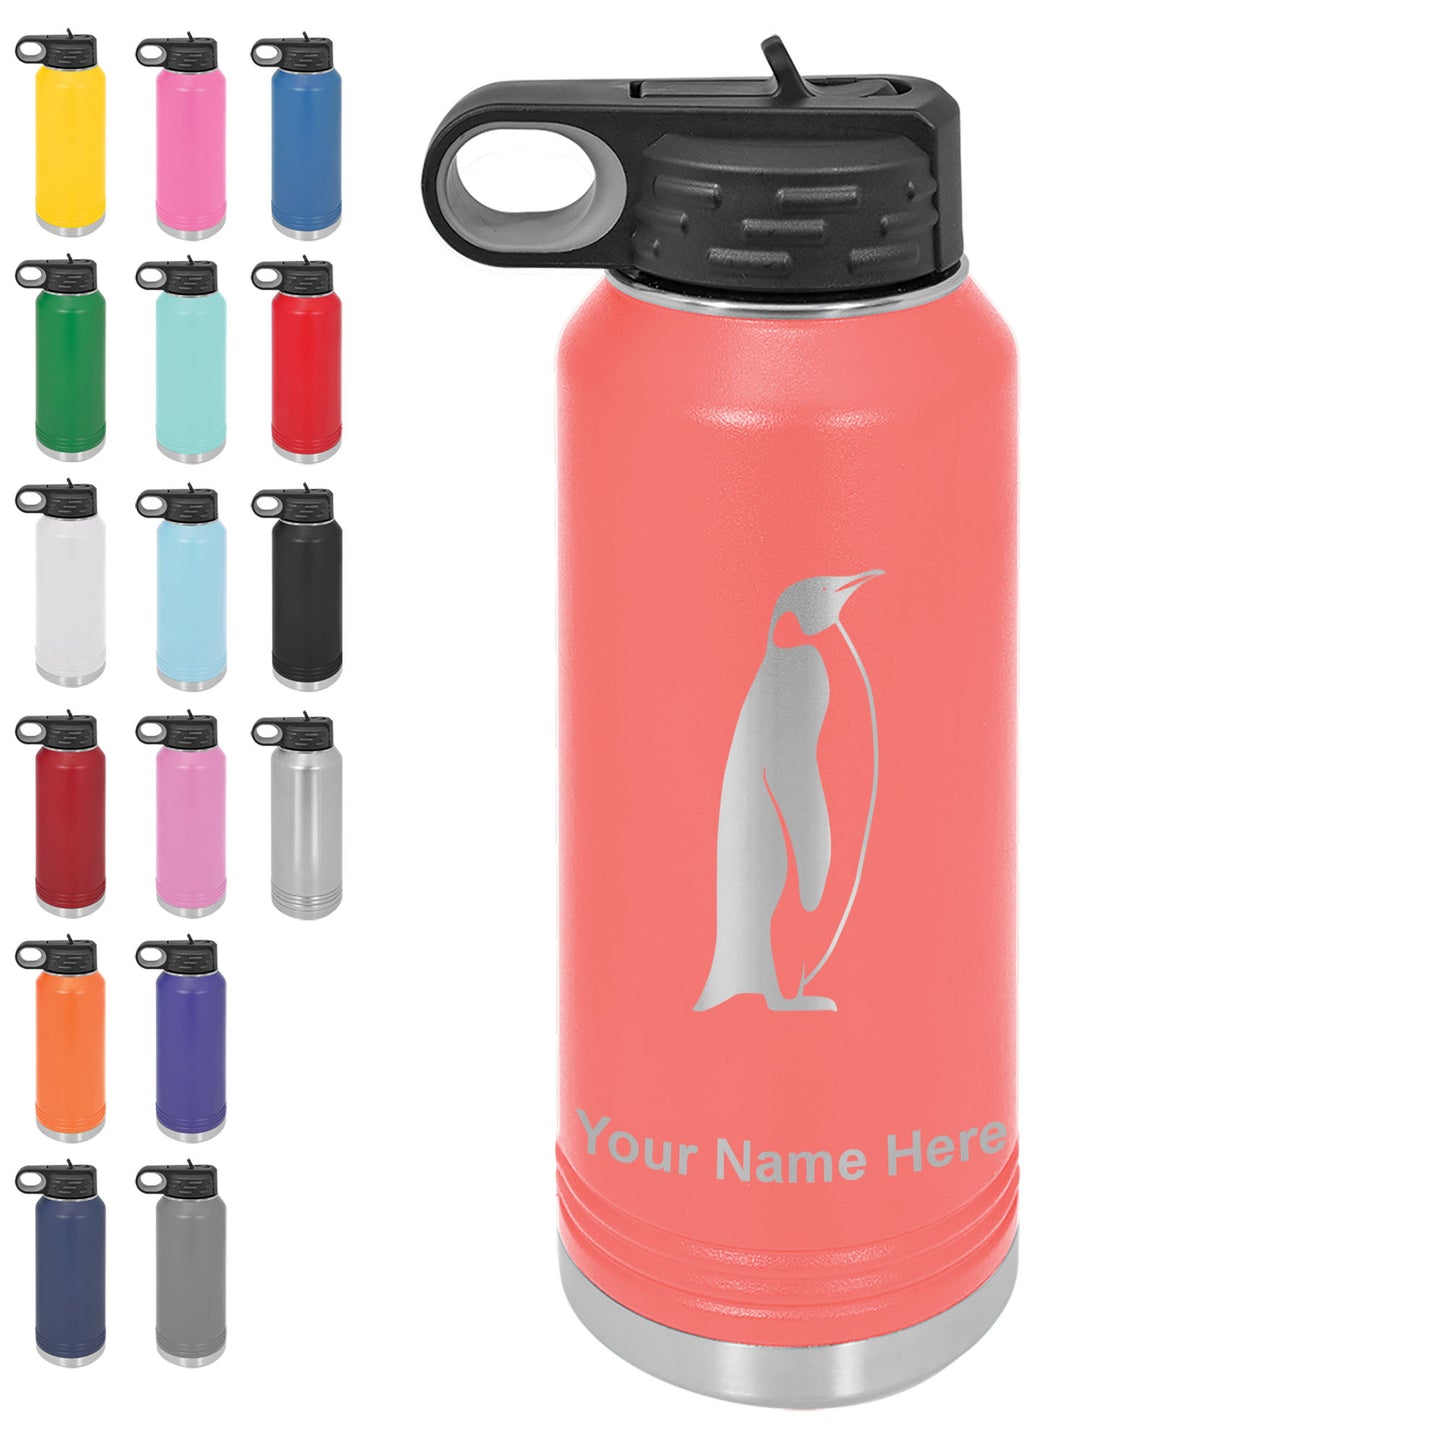 LaserGram 32oz Double Wall Flip Top Water Bottle with Straw, Penguin, Personalized Engraving Included